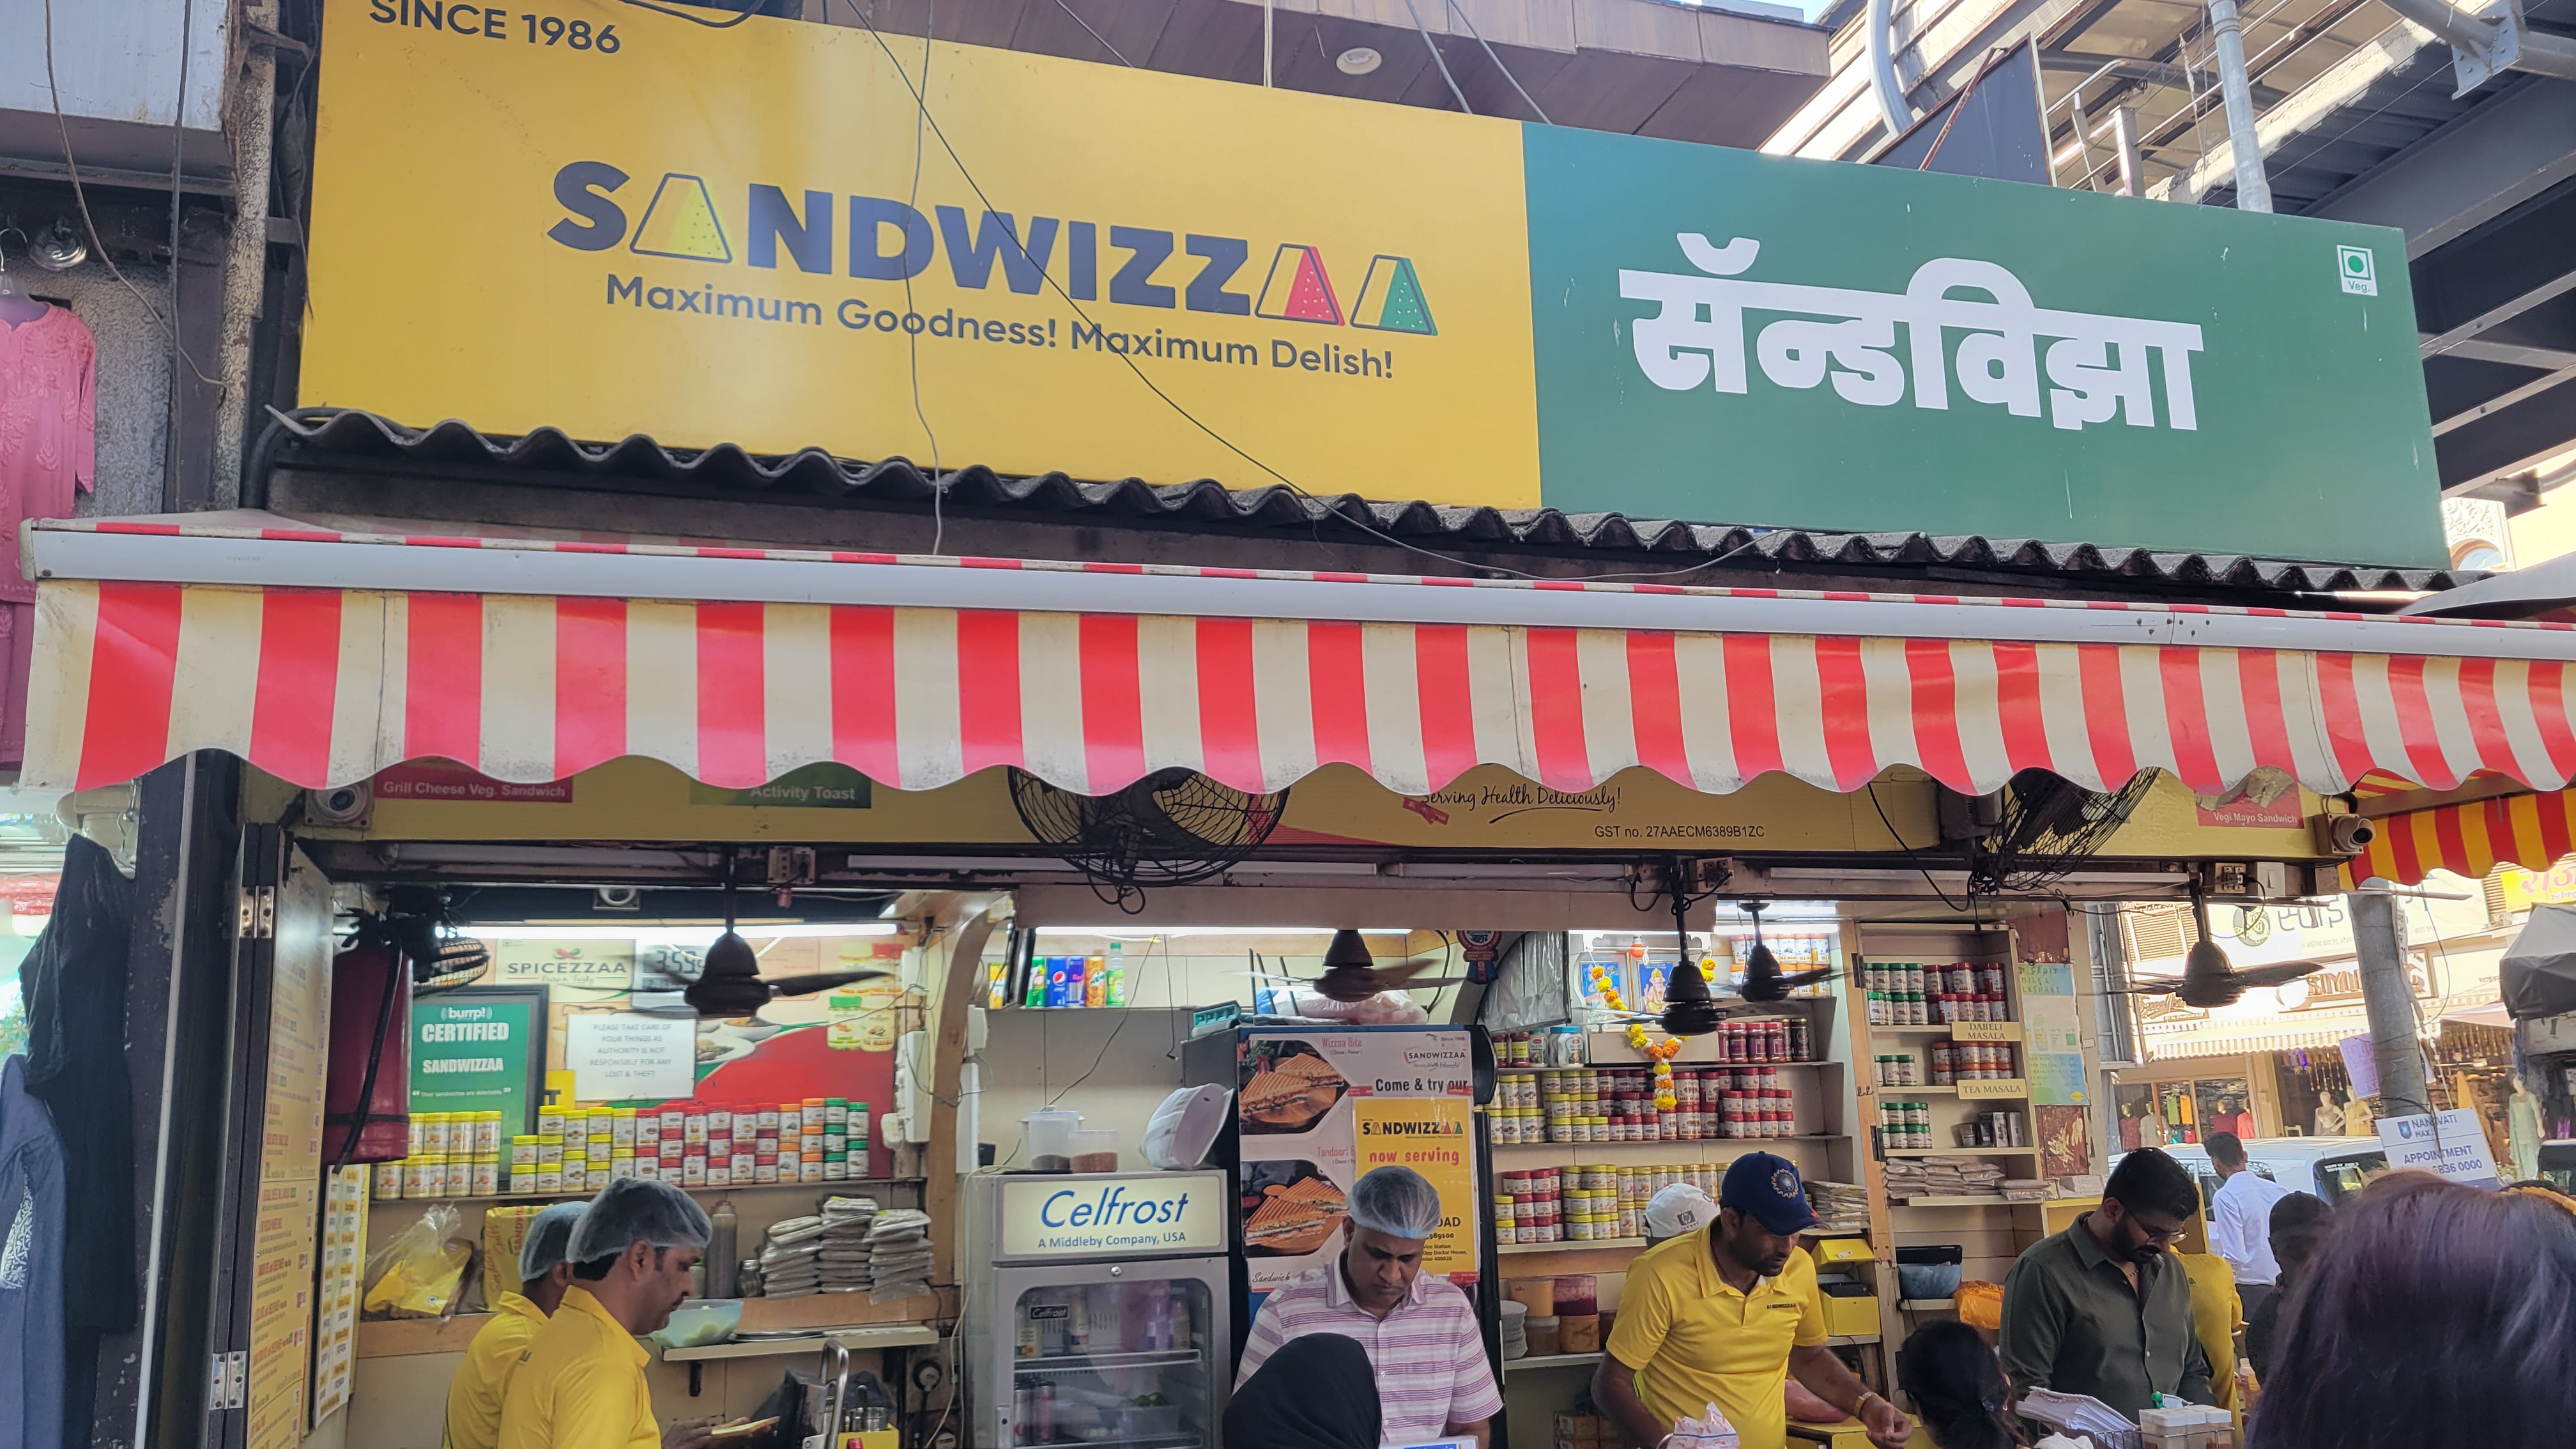 A bustling store in Mumbai that sells sandwiches.